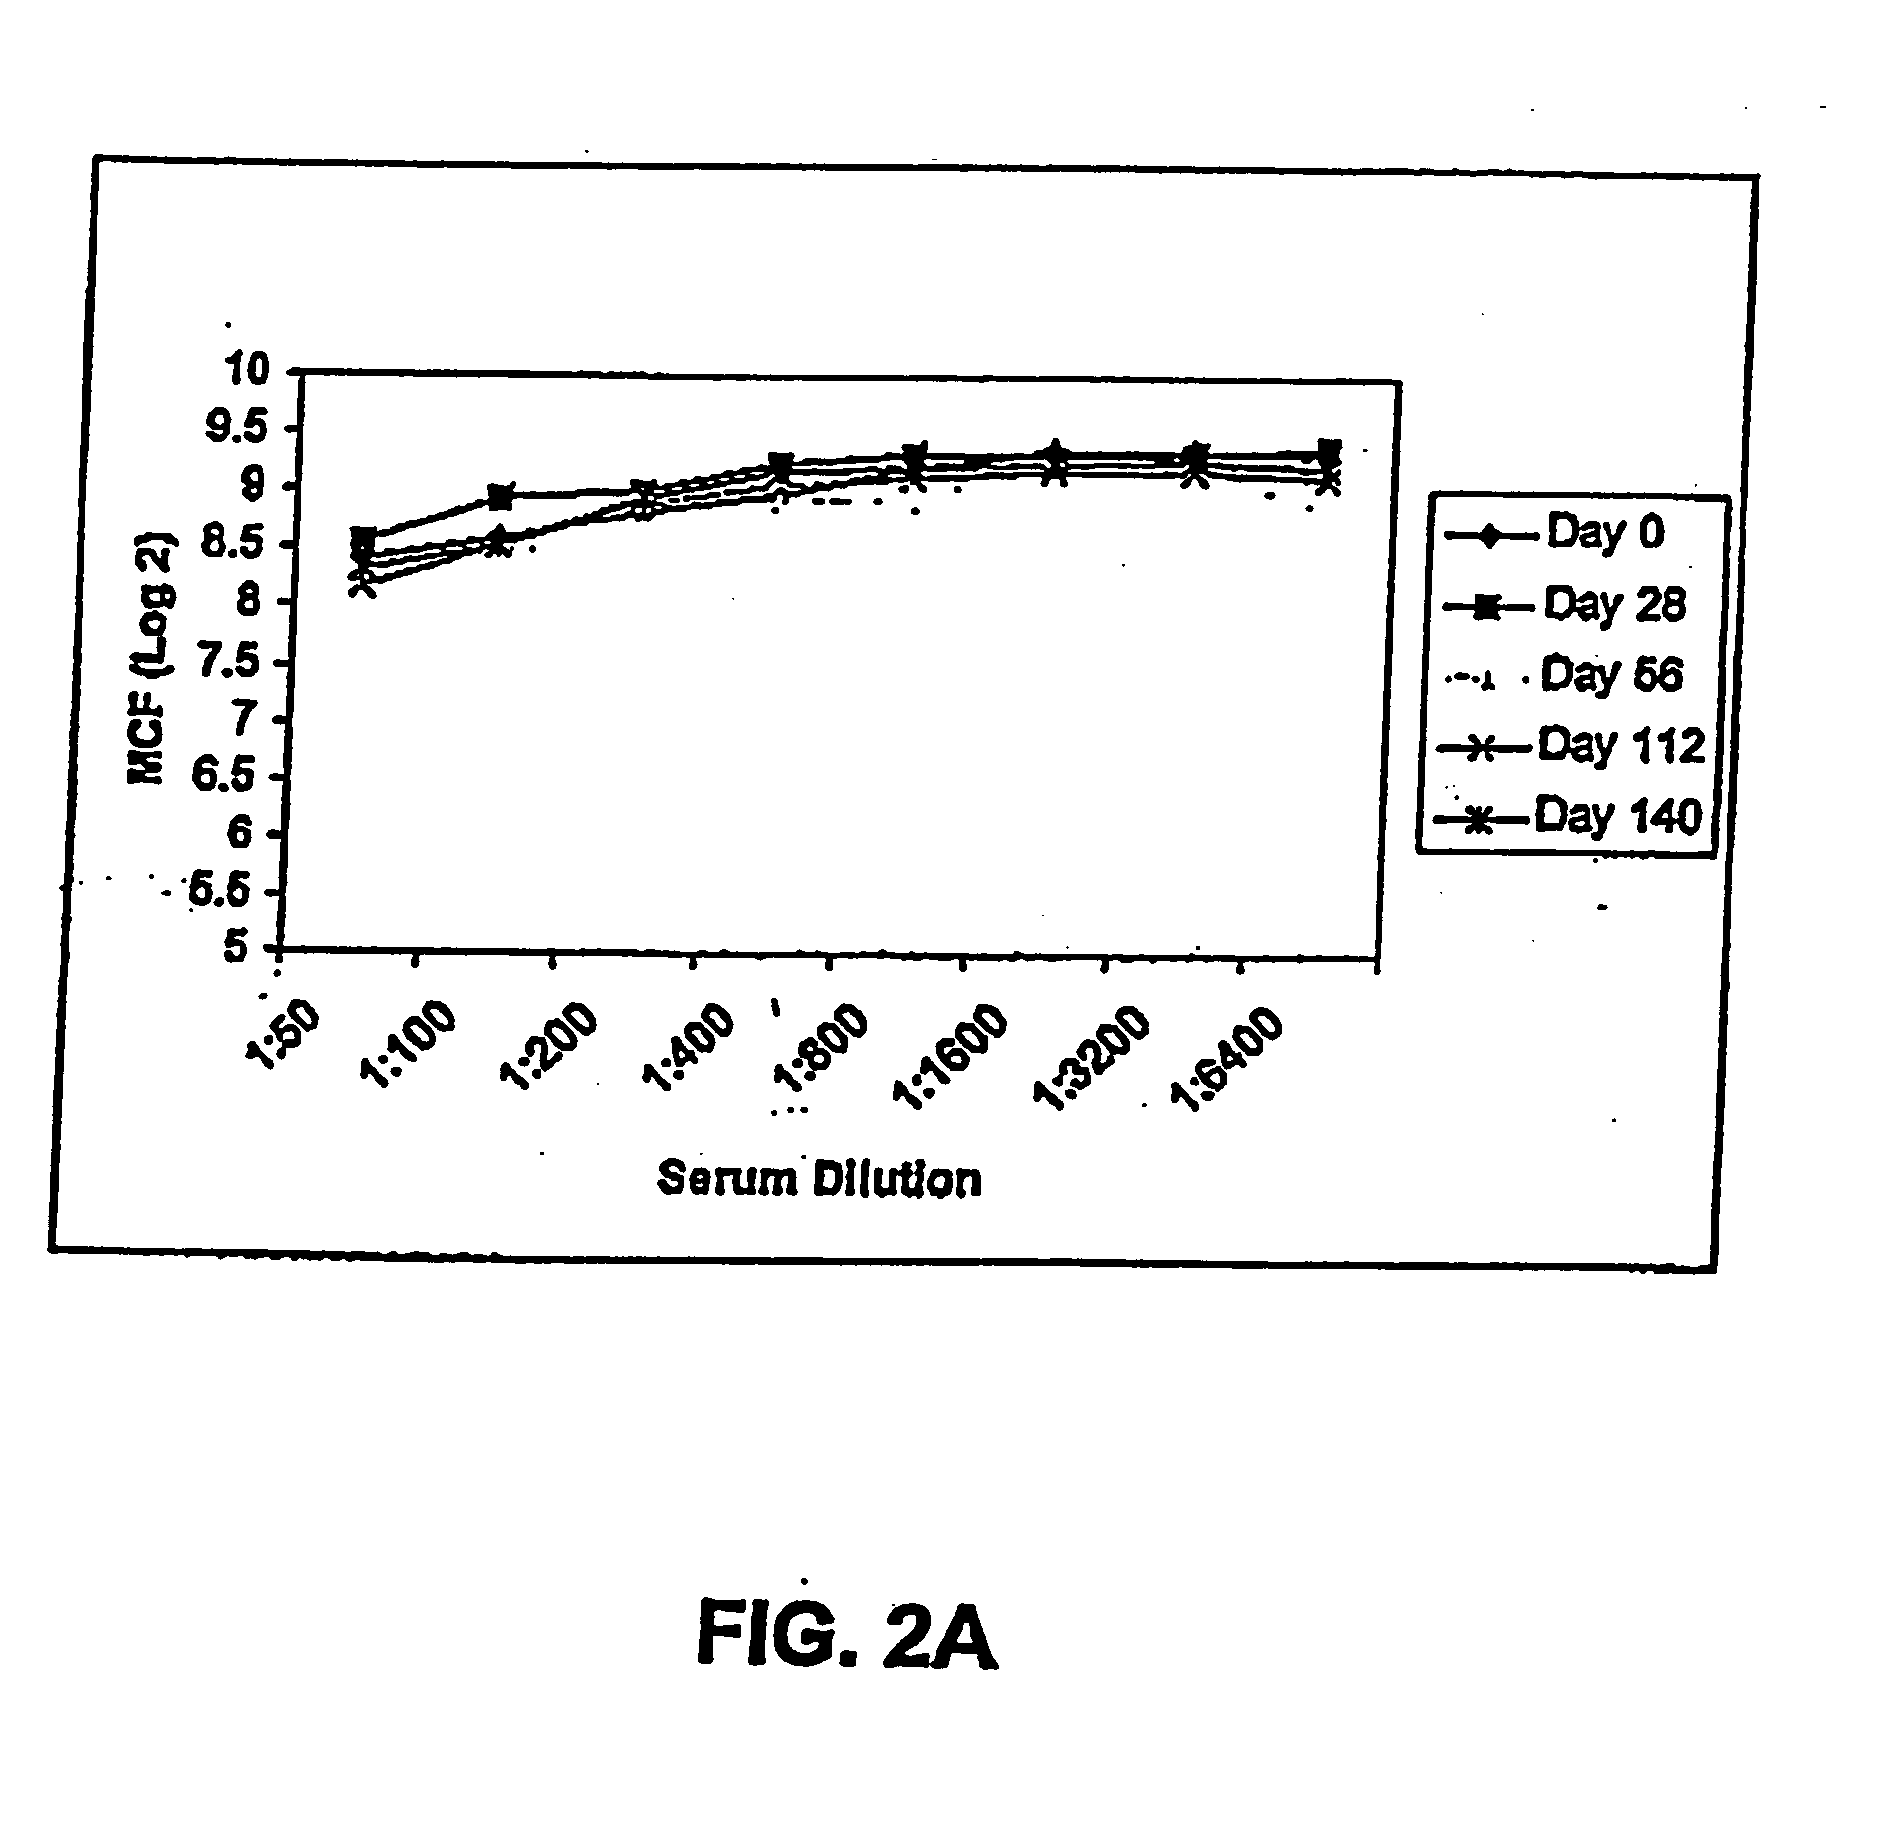 Method of administering FimH protein as a vaccine for urinary tract infections